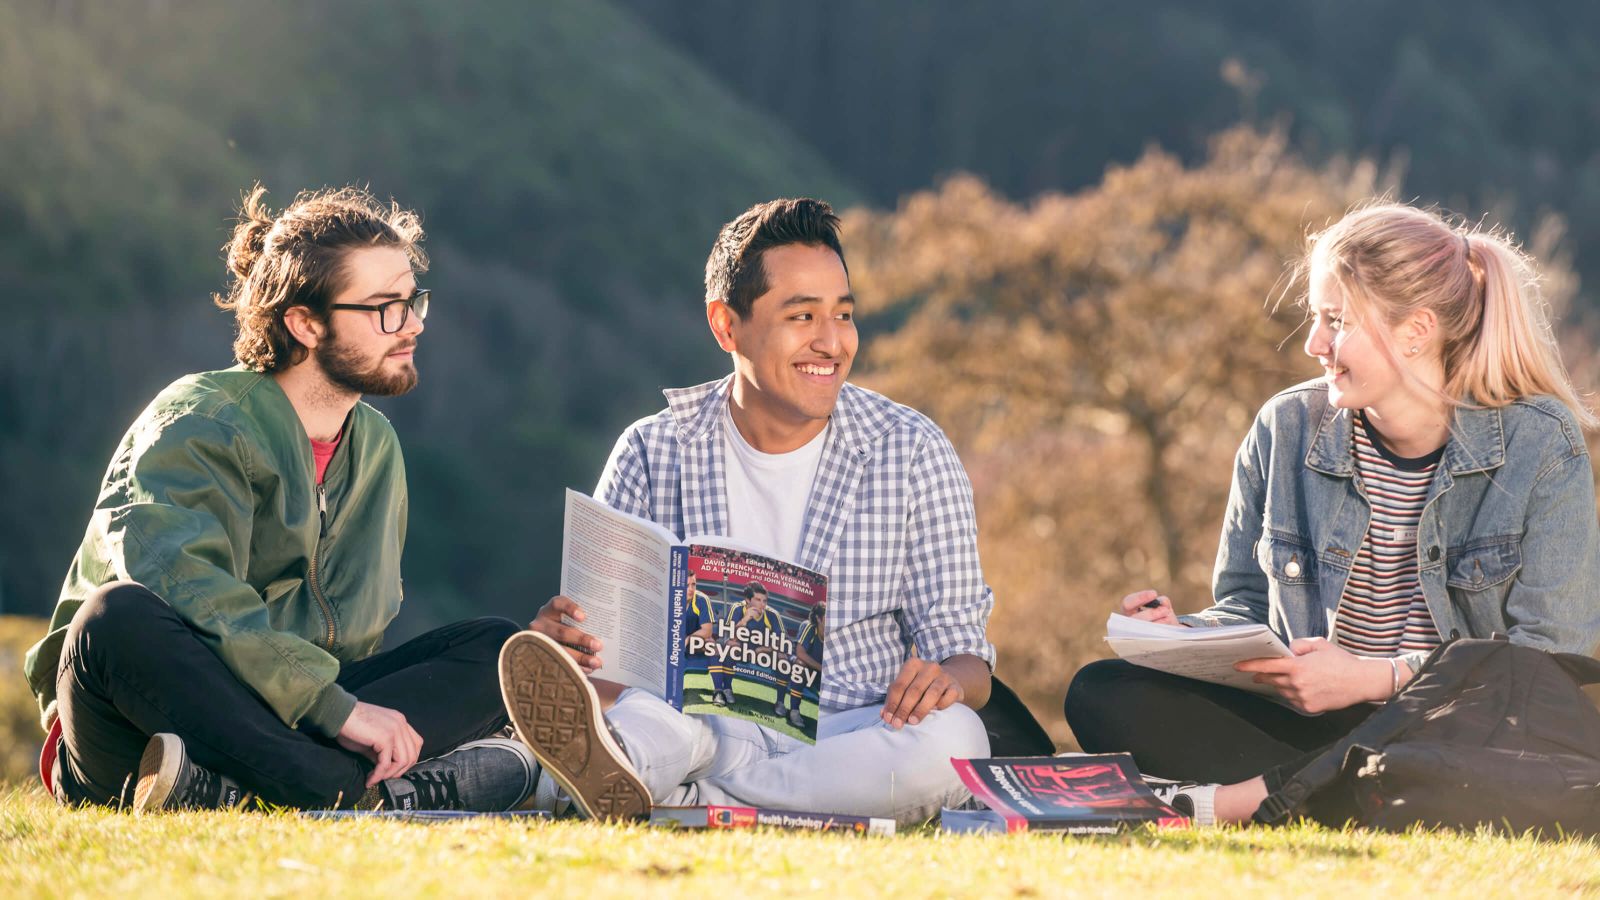 Three students sitting on a lawn and studying together on a sunny day.